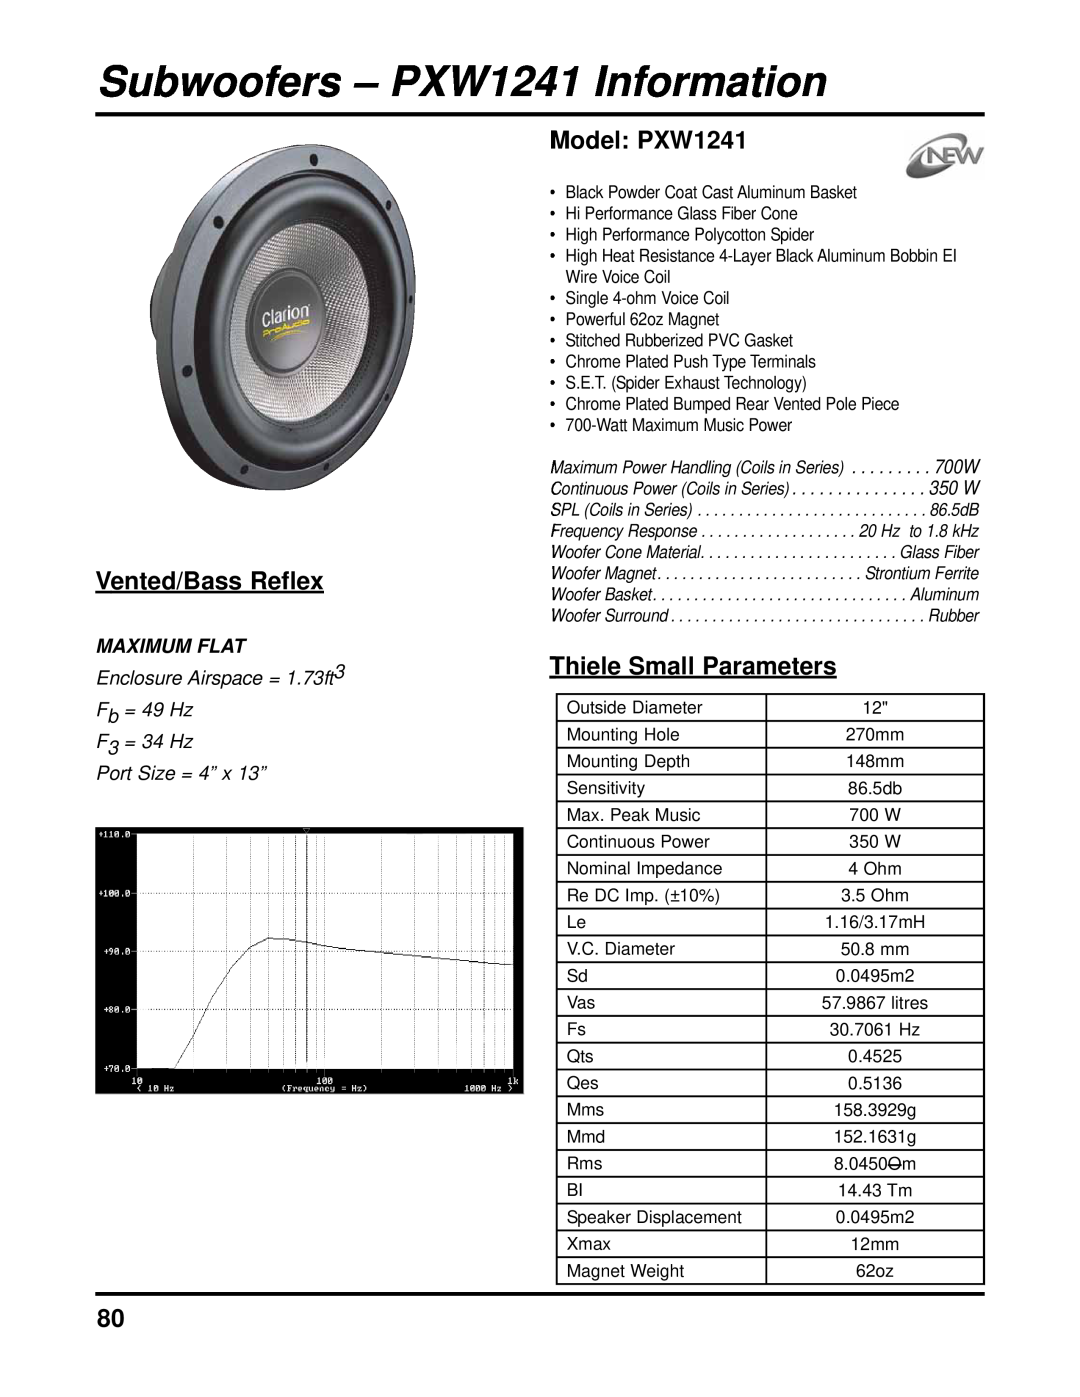 Clarion manual Subwoofers - PXW1241 Information, Vented/Bass Reflex, Model PXW1241, Thiele Small Parameters 